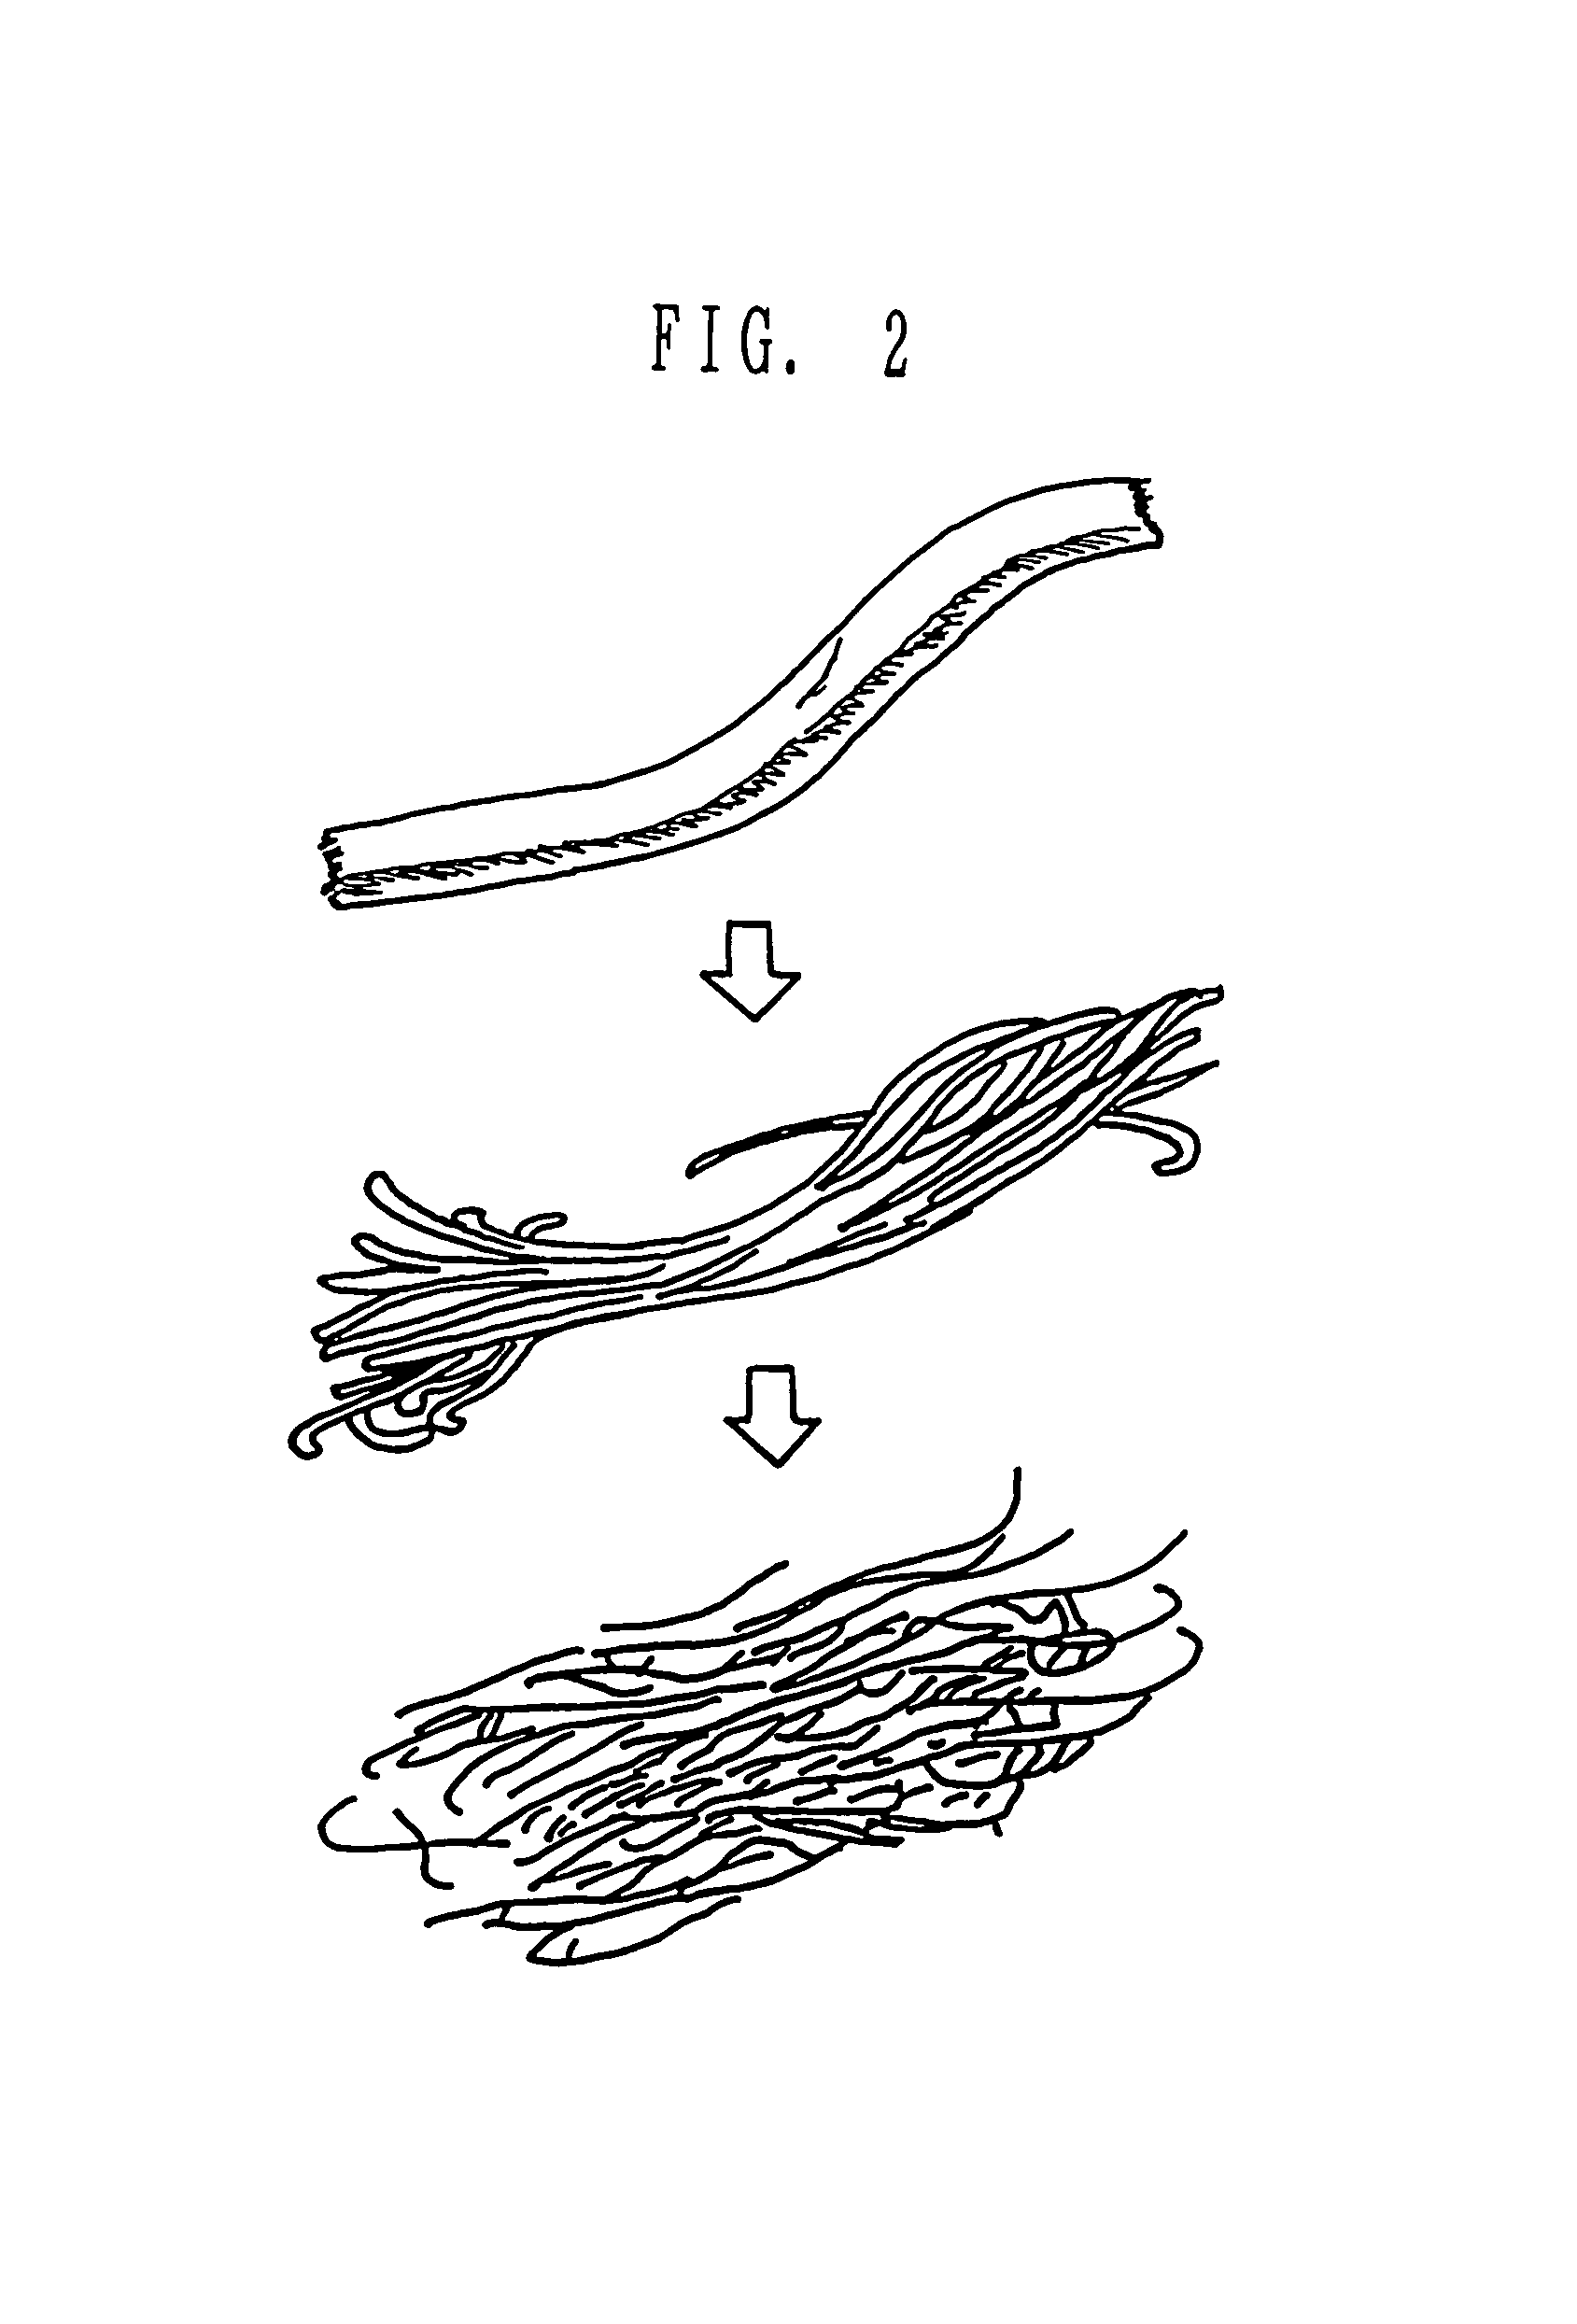 Highly absorbent composite compositions, absorbent sheets provided with the compositions, and process for producing the same